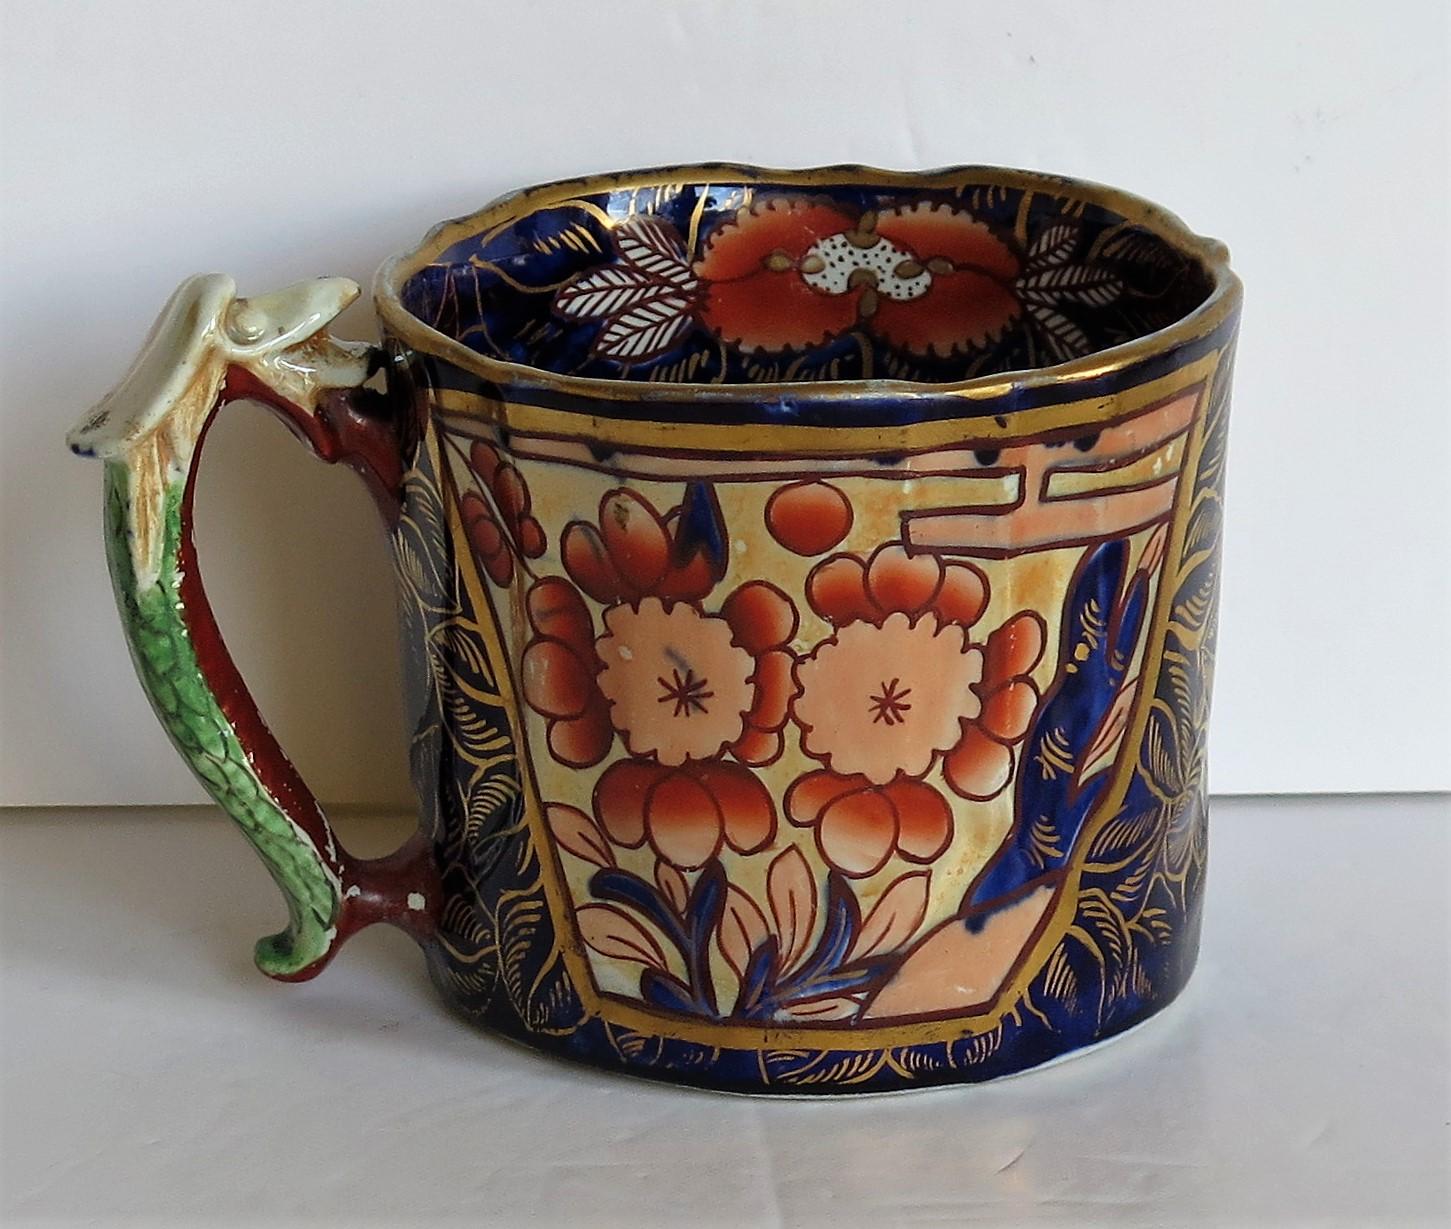 This is a rare, Ironstone pottery large mug in the School House pattern, made by Mason's Ironstone, of Lane Delph, Staffordshire, England, circa 1818

Mason's ironstone mugs are rare, particularly in this very desirable pattern. This mug is large